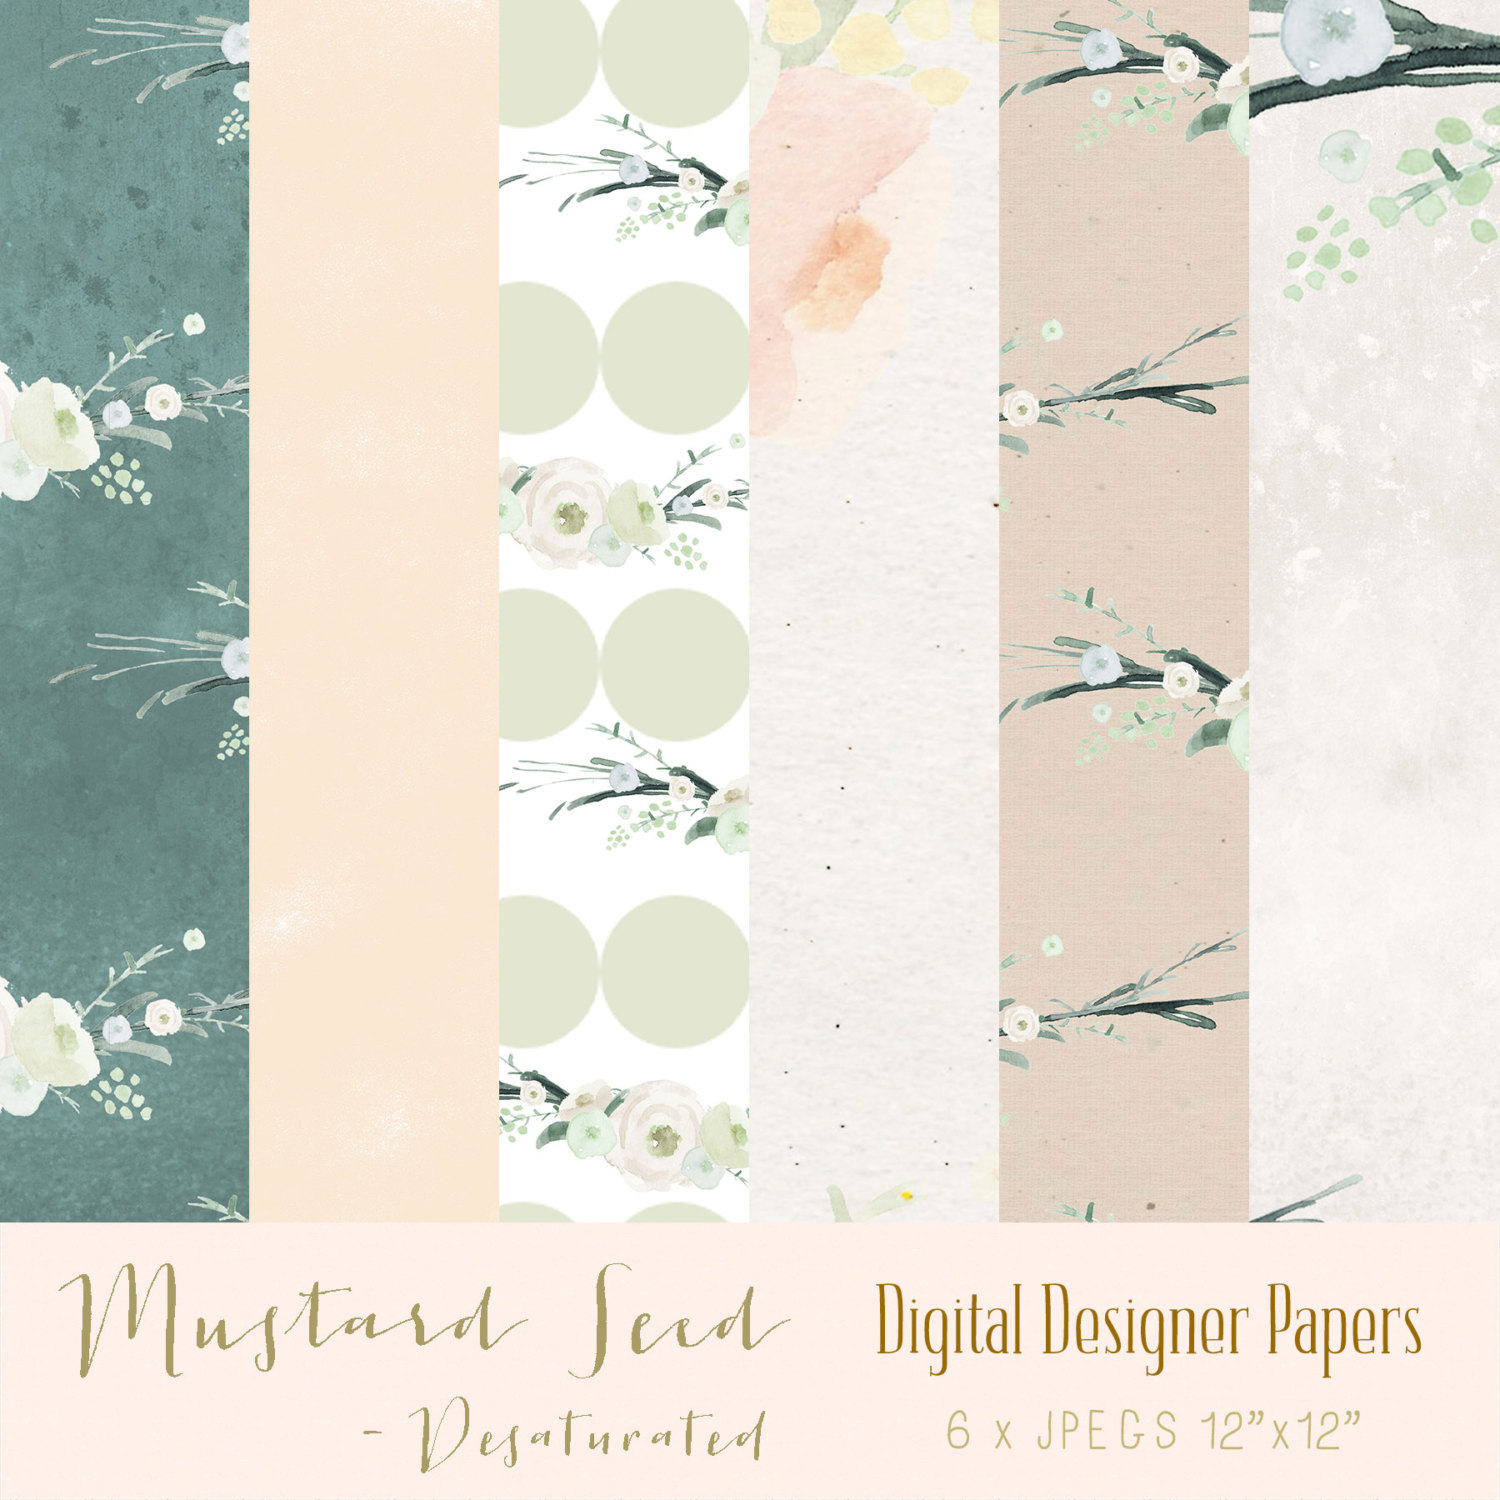 Digital Patterned Papers Mustard Seed Desaturated By Createthecut